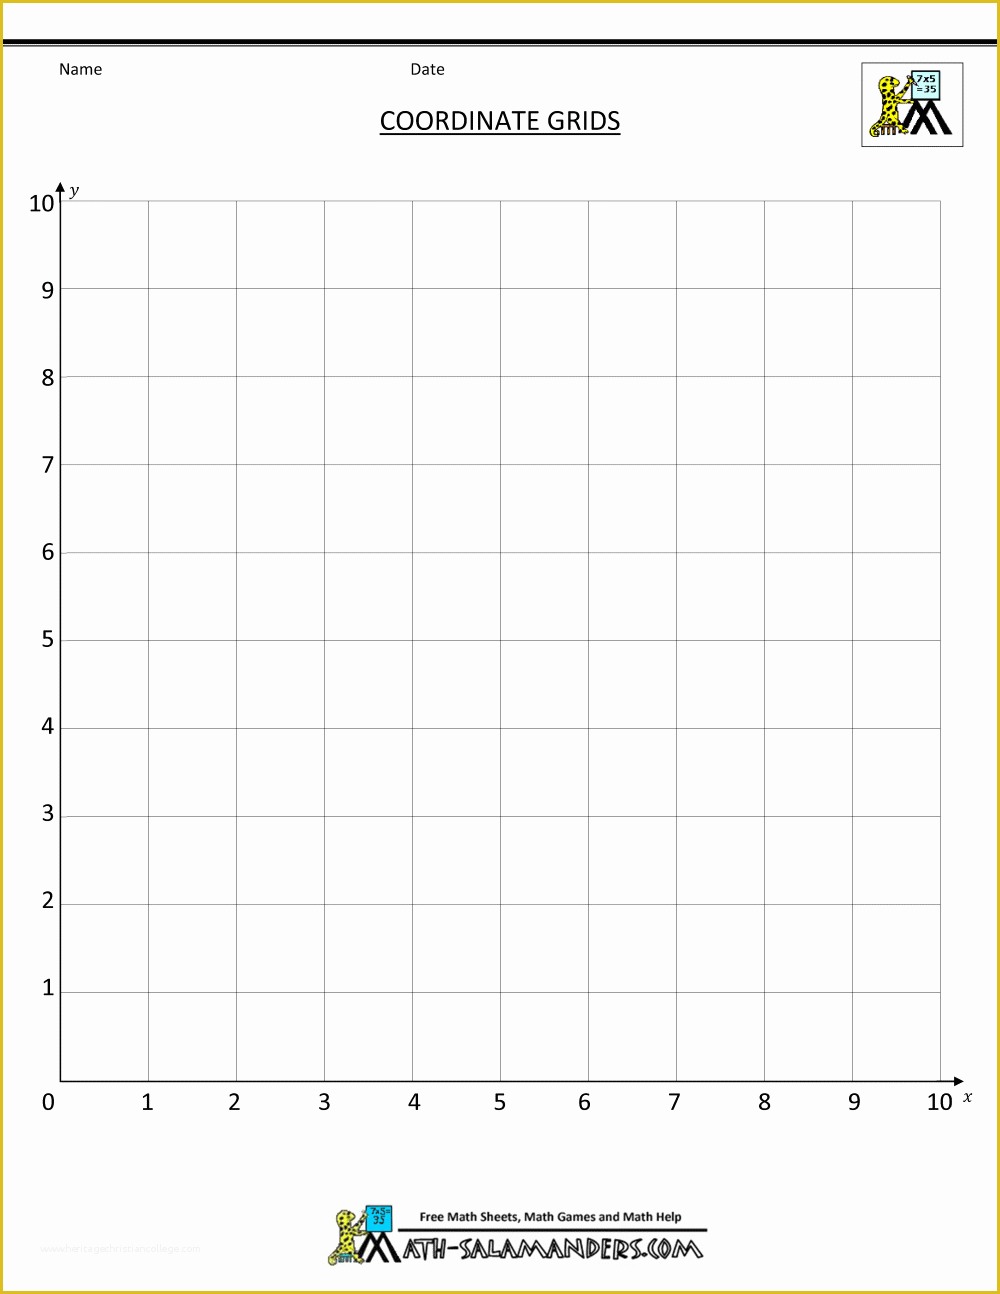 Free Graph Templates Of Search Results for “empty Bar Graph Template” – Calendar 2015